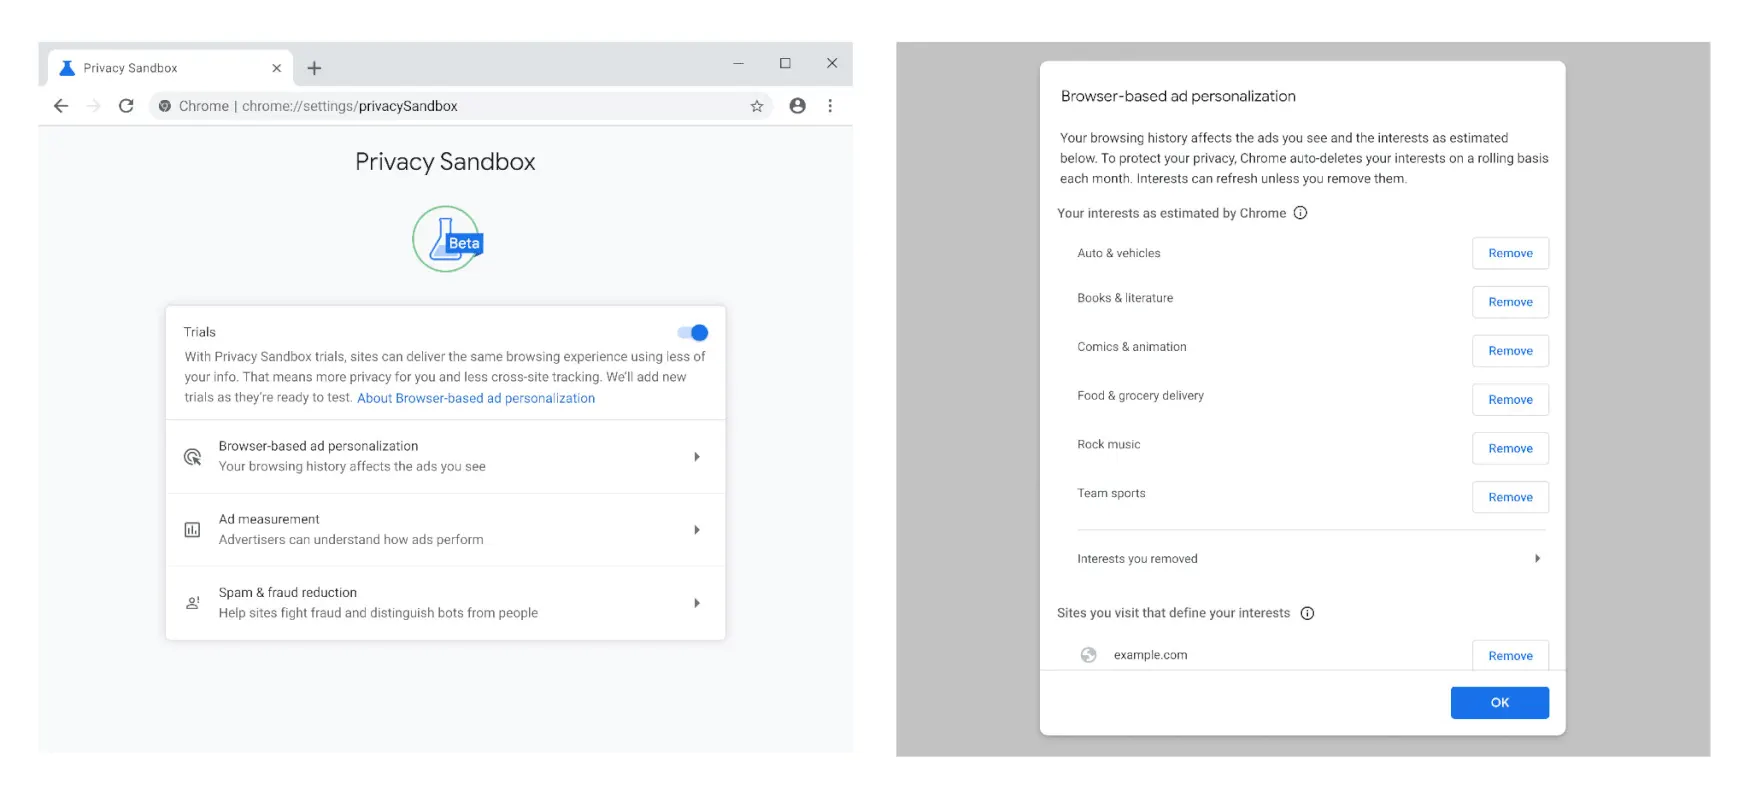 Google begins trials of new Privacy Sandbox settings in Chrome